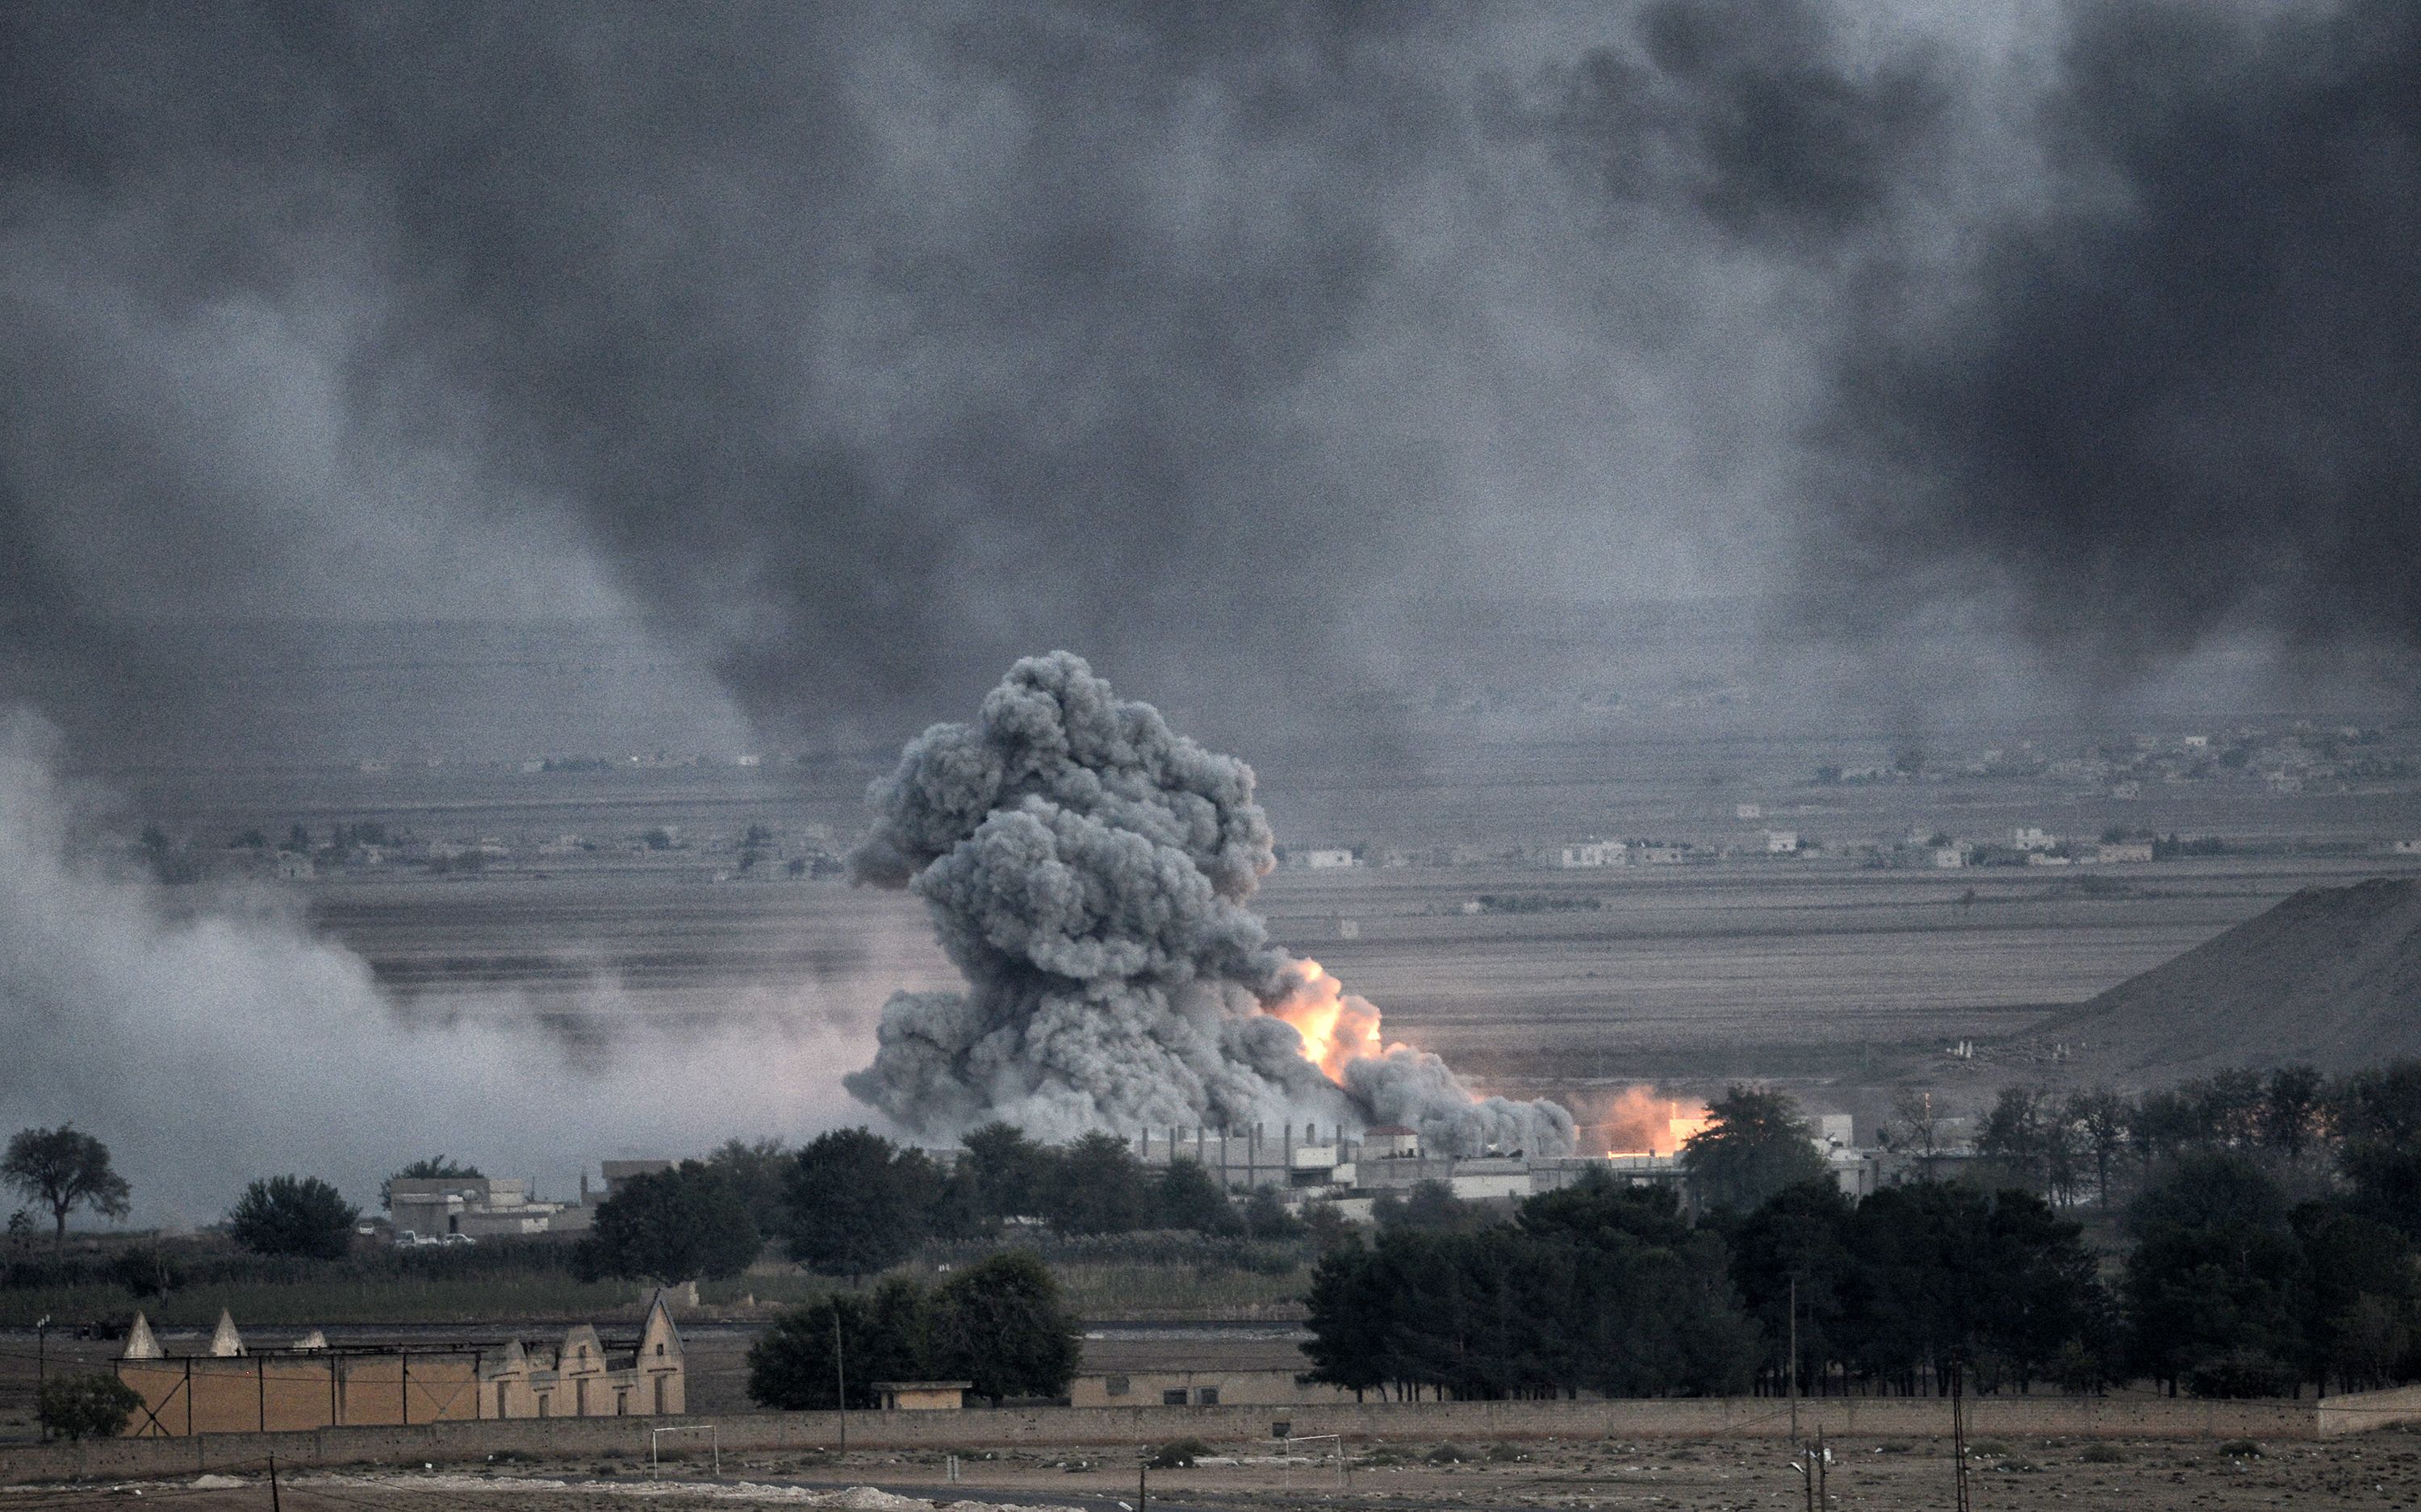 An explosion after an apparent US-led coalition airstrike on Kobane, Syria, as seen from the Turkish side of the border, near Suruc district, 24 October 2014, Sanliurfa, Turkey